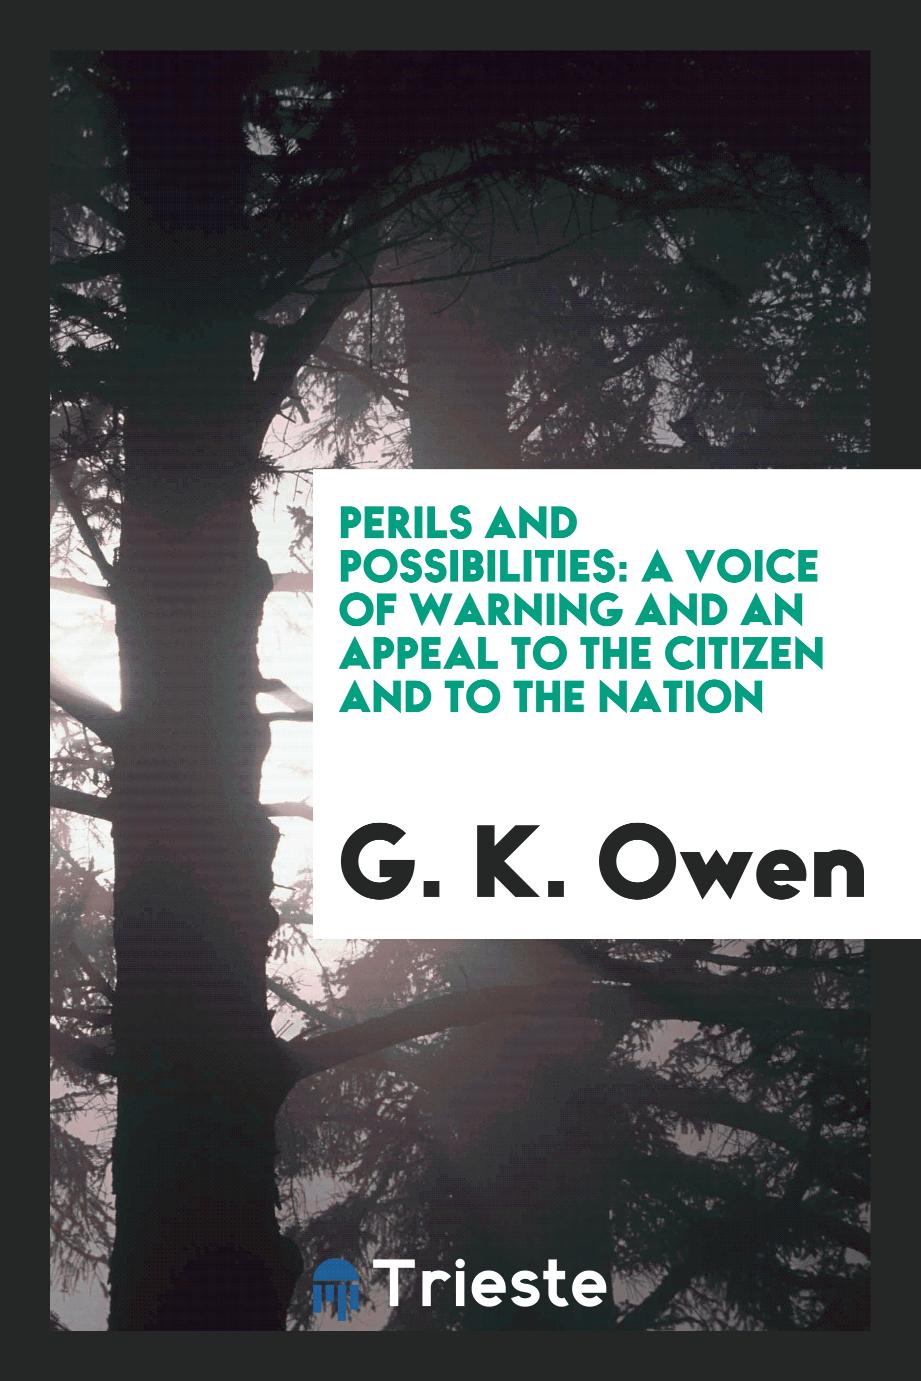 Perils and possibilities: a voice of warning and an appeal to the citizen and to the nation